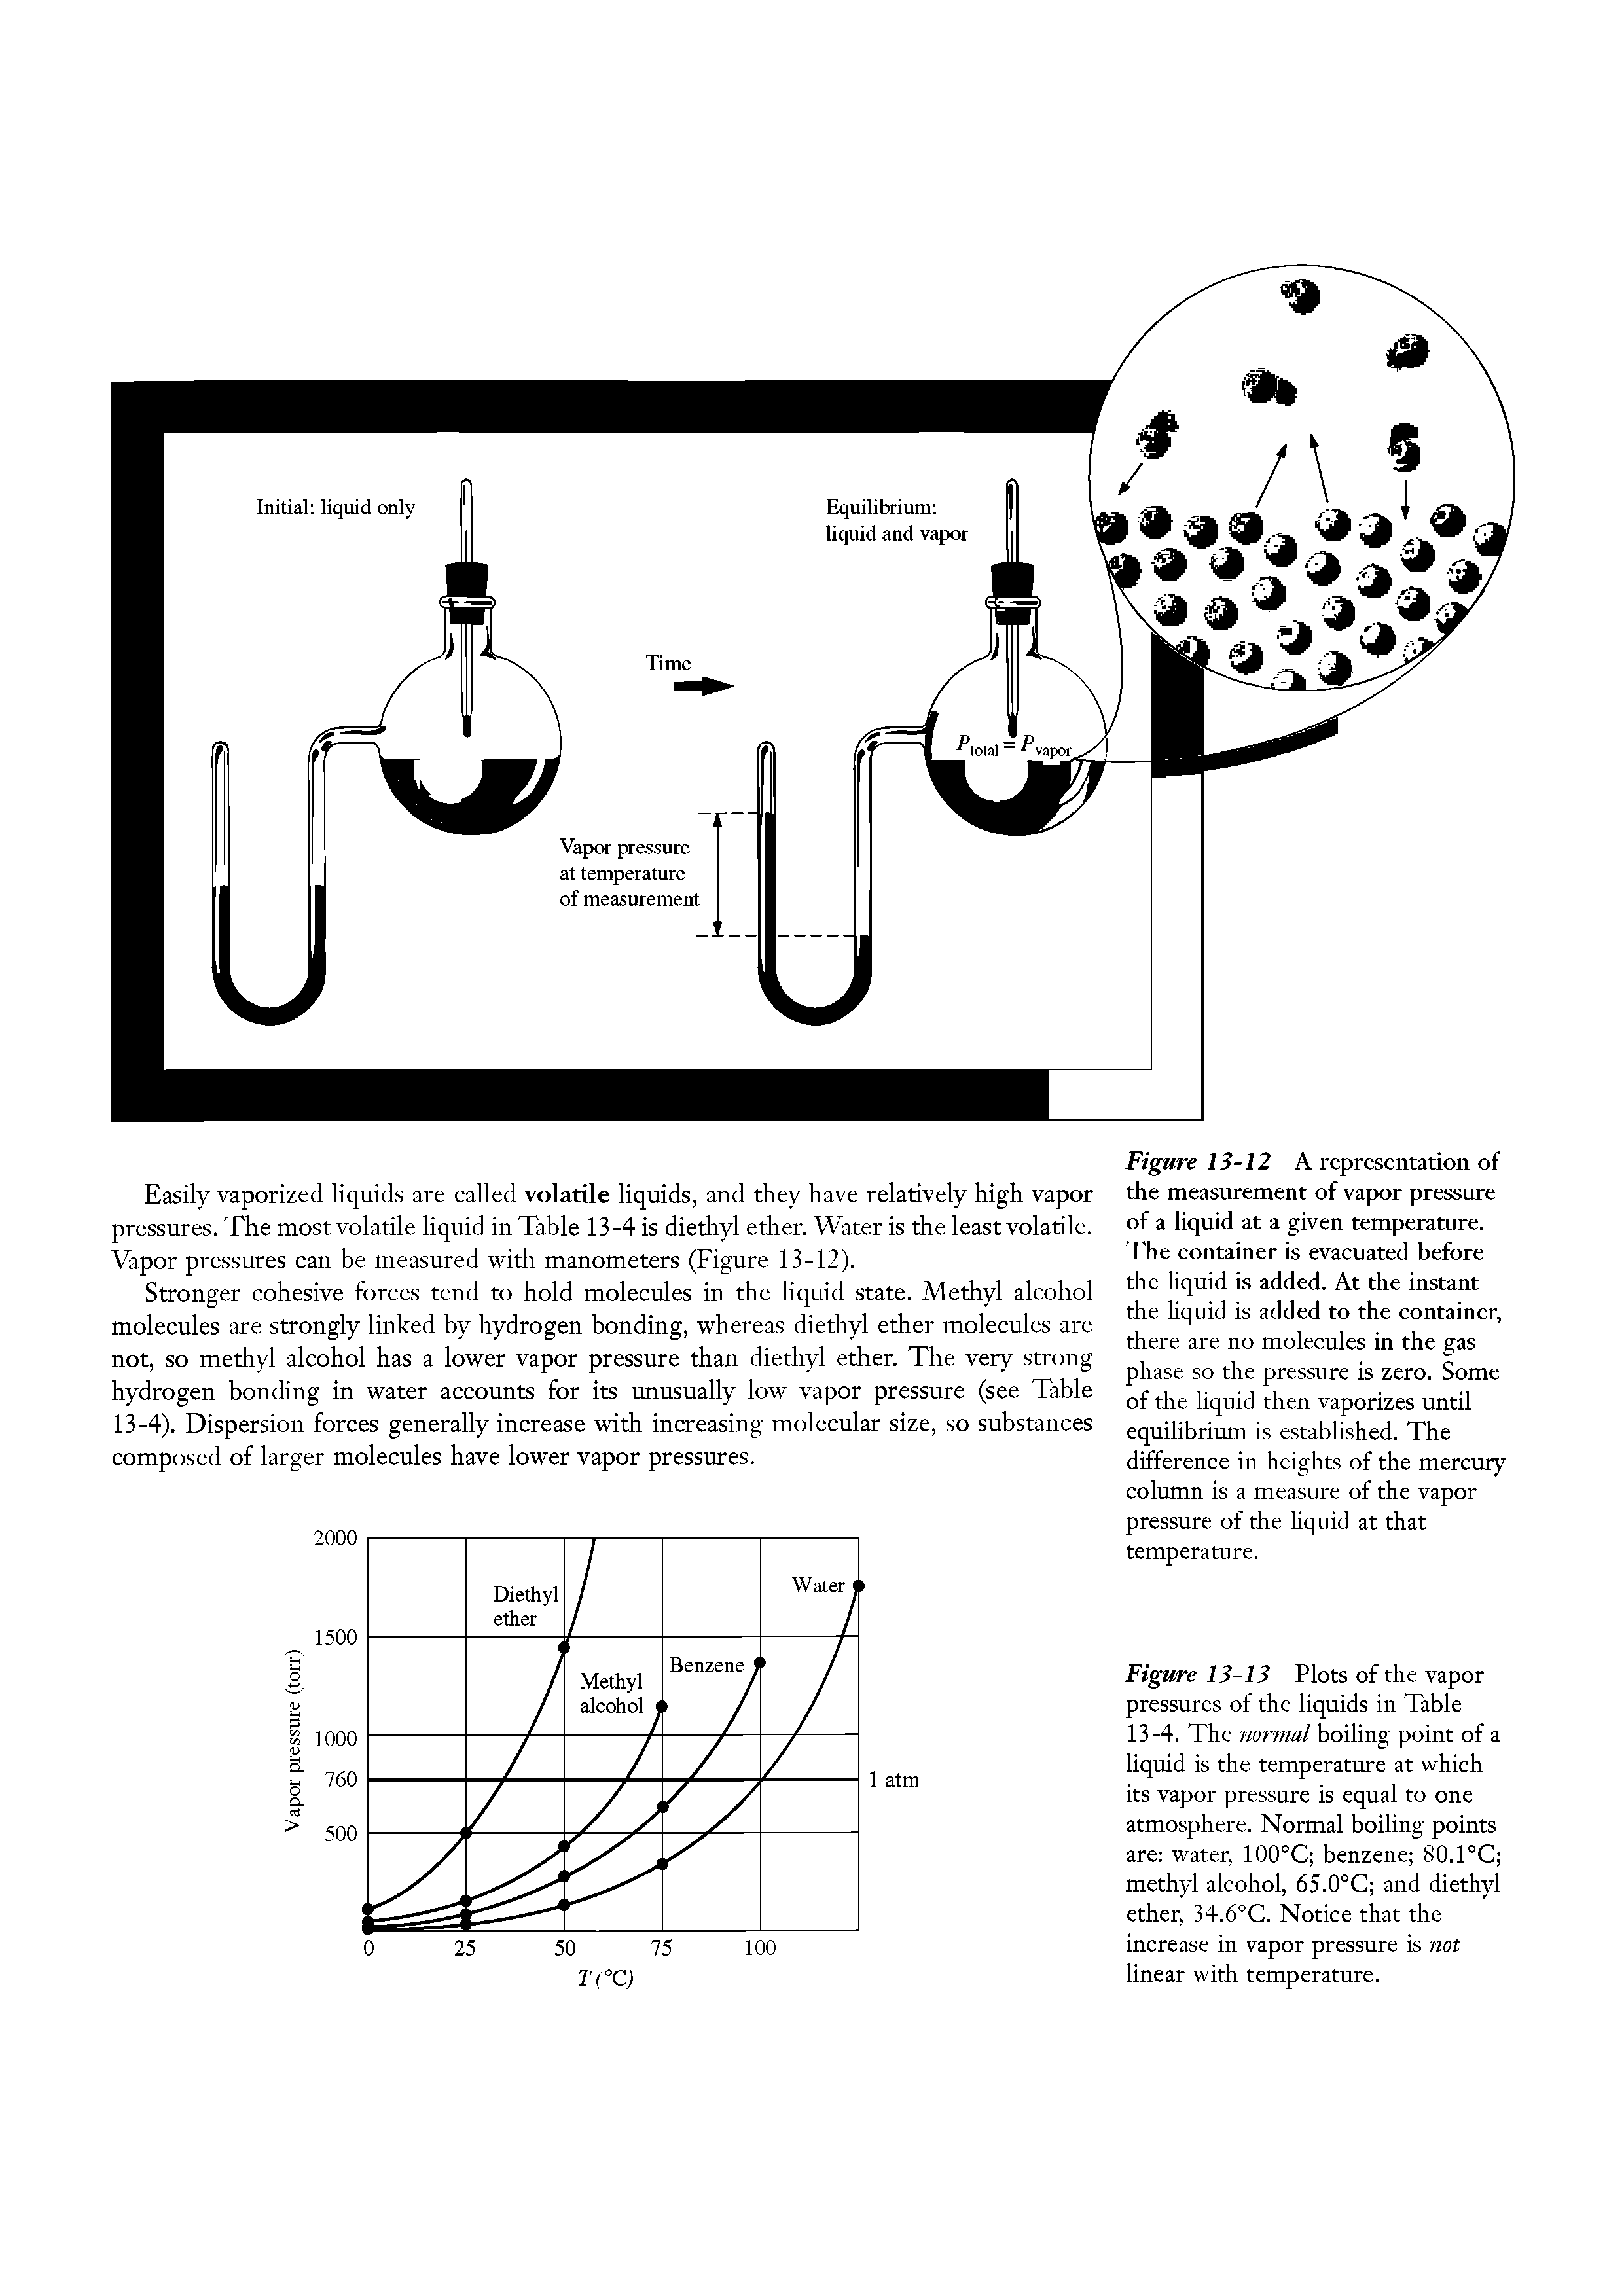 Figure 13-13 Plots of the vapor pressures of the liquids in Table 13-4. The normal boiling point of a liquid is the temperature at which its vapor pressure is equal to one atmosphere. Normal boiling points are water, 100°C benzene 80.1°C methyl alcohol, 65.0°C and diethyl ether, 34.6°C. Notice that the increase in vapor pressure is not linear with temperature.